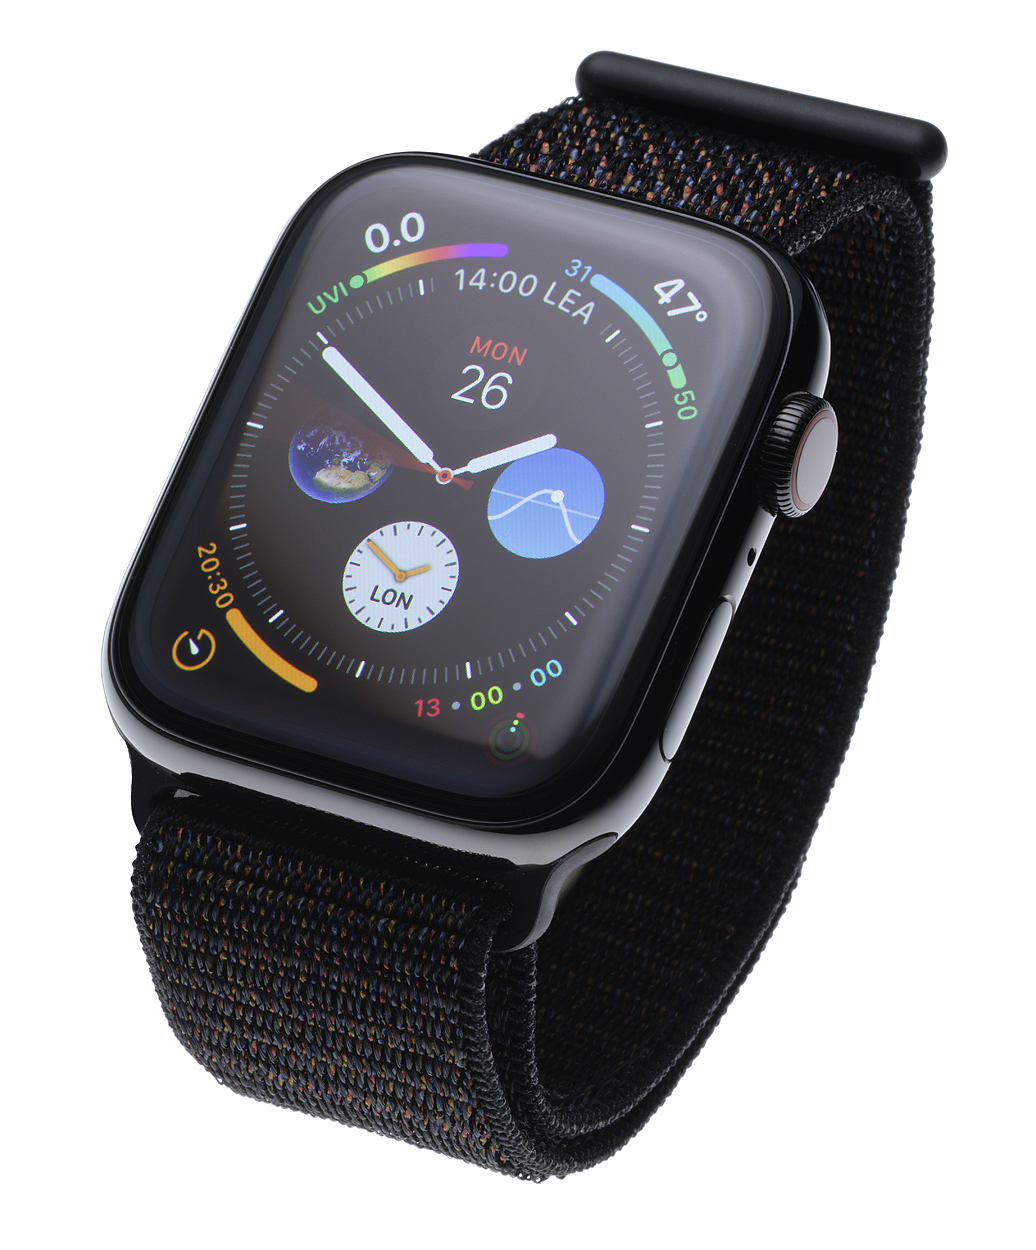 Apple Watch picture